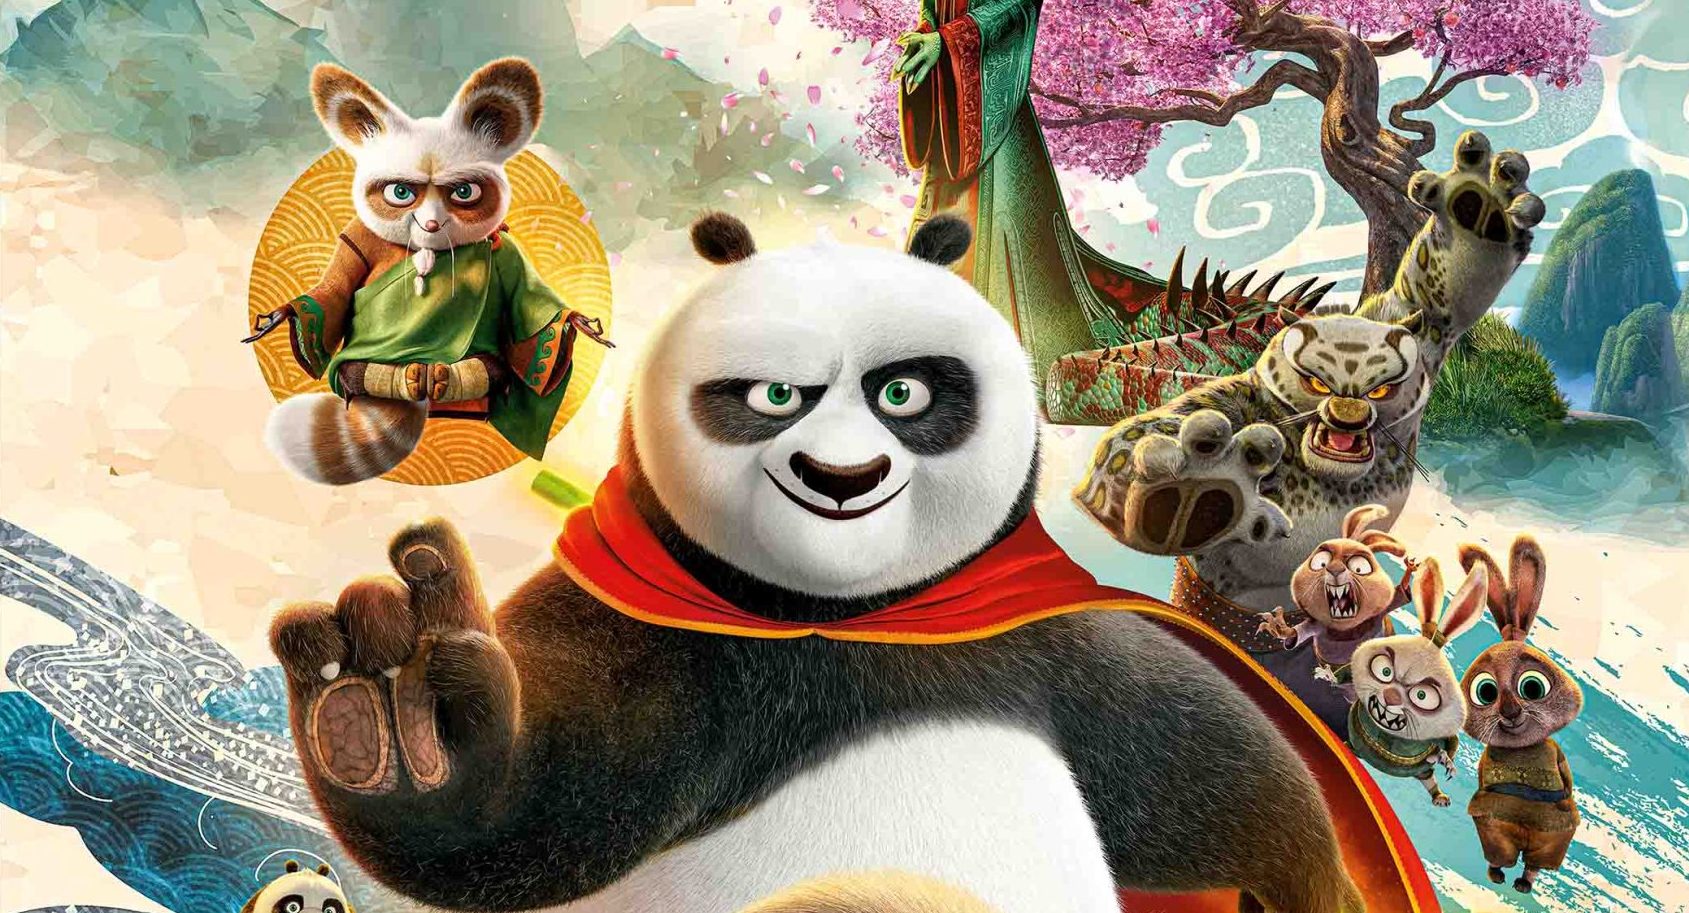 Enter ‘Kung Fu Panda 4 Dubbing Contest’ the lucky winner will be chosen to give voice!